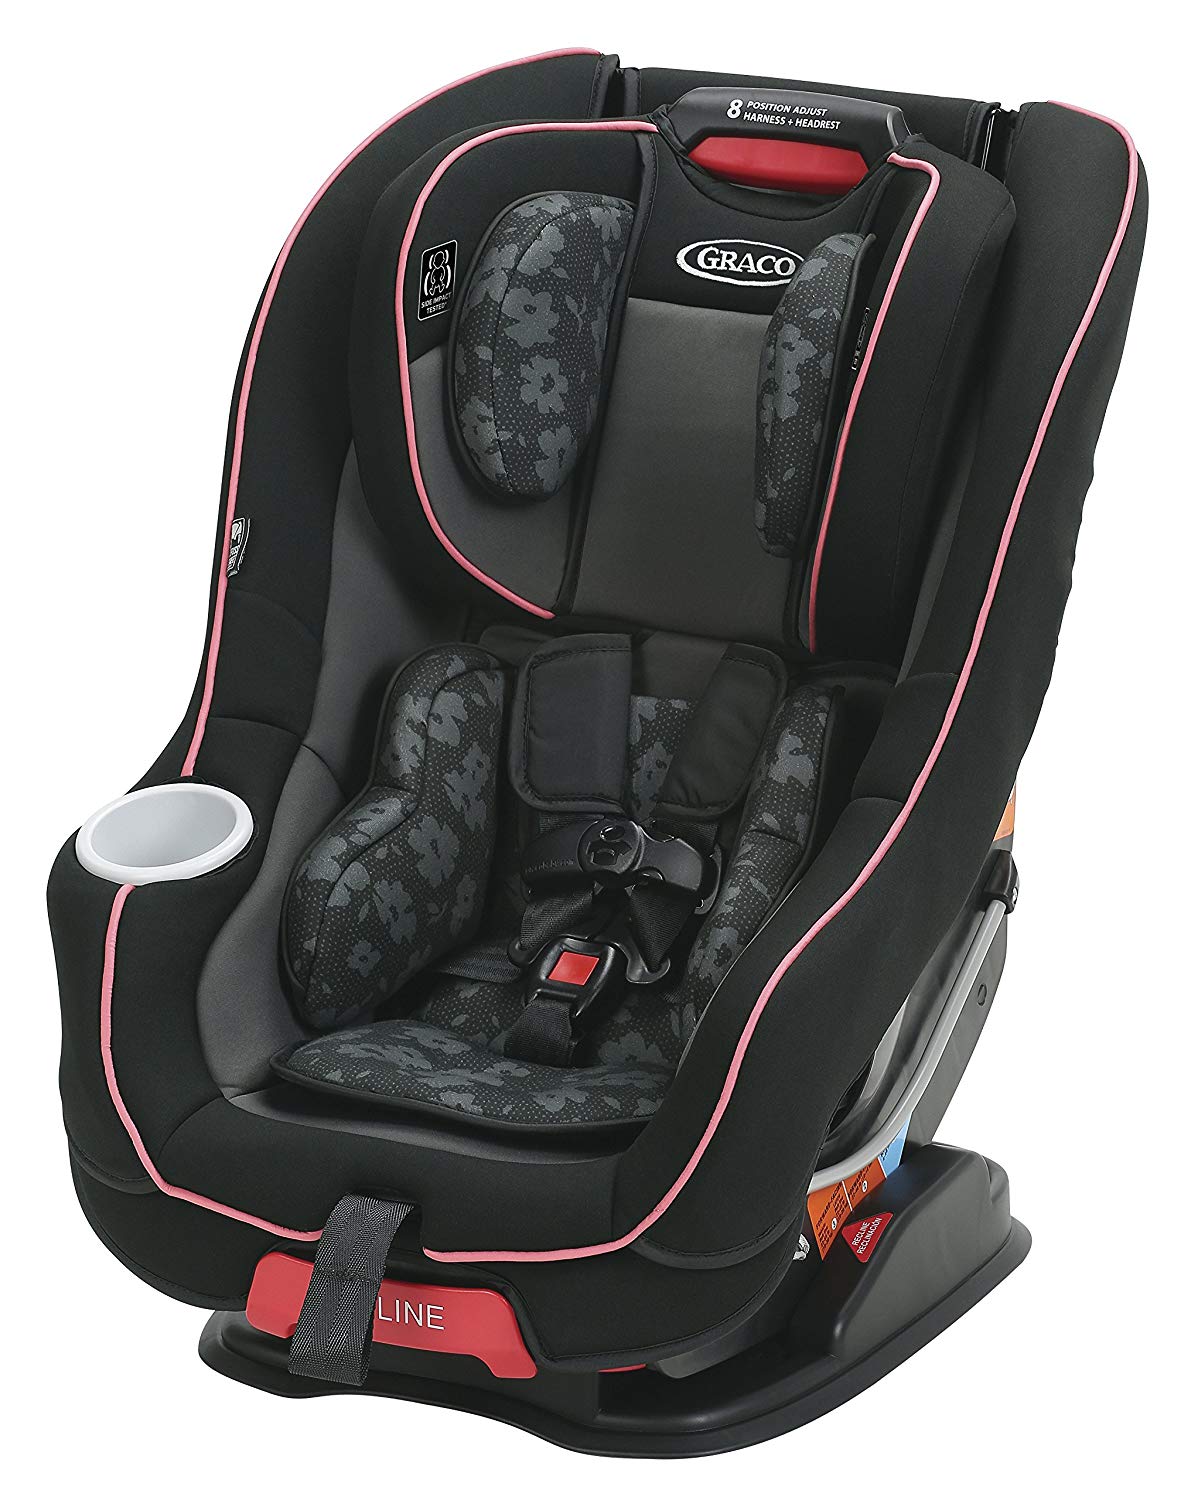 Graco Size4Me 65 Convertible Car Seat Review - Auto by Mars